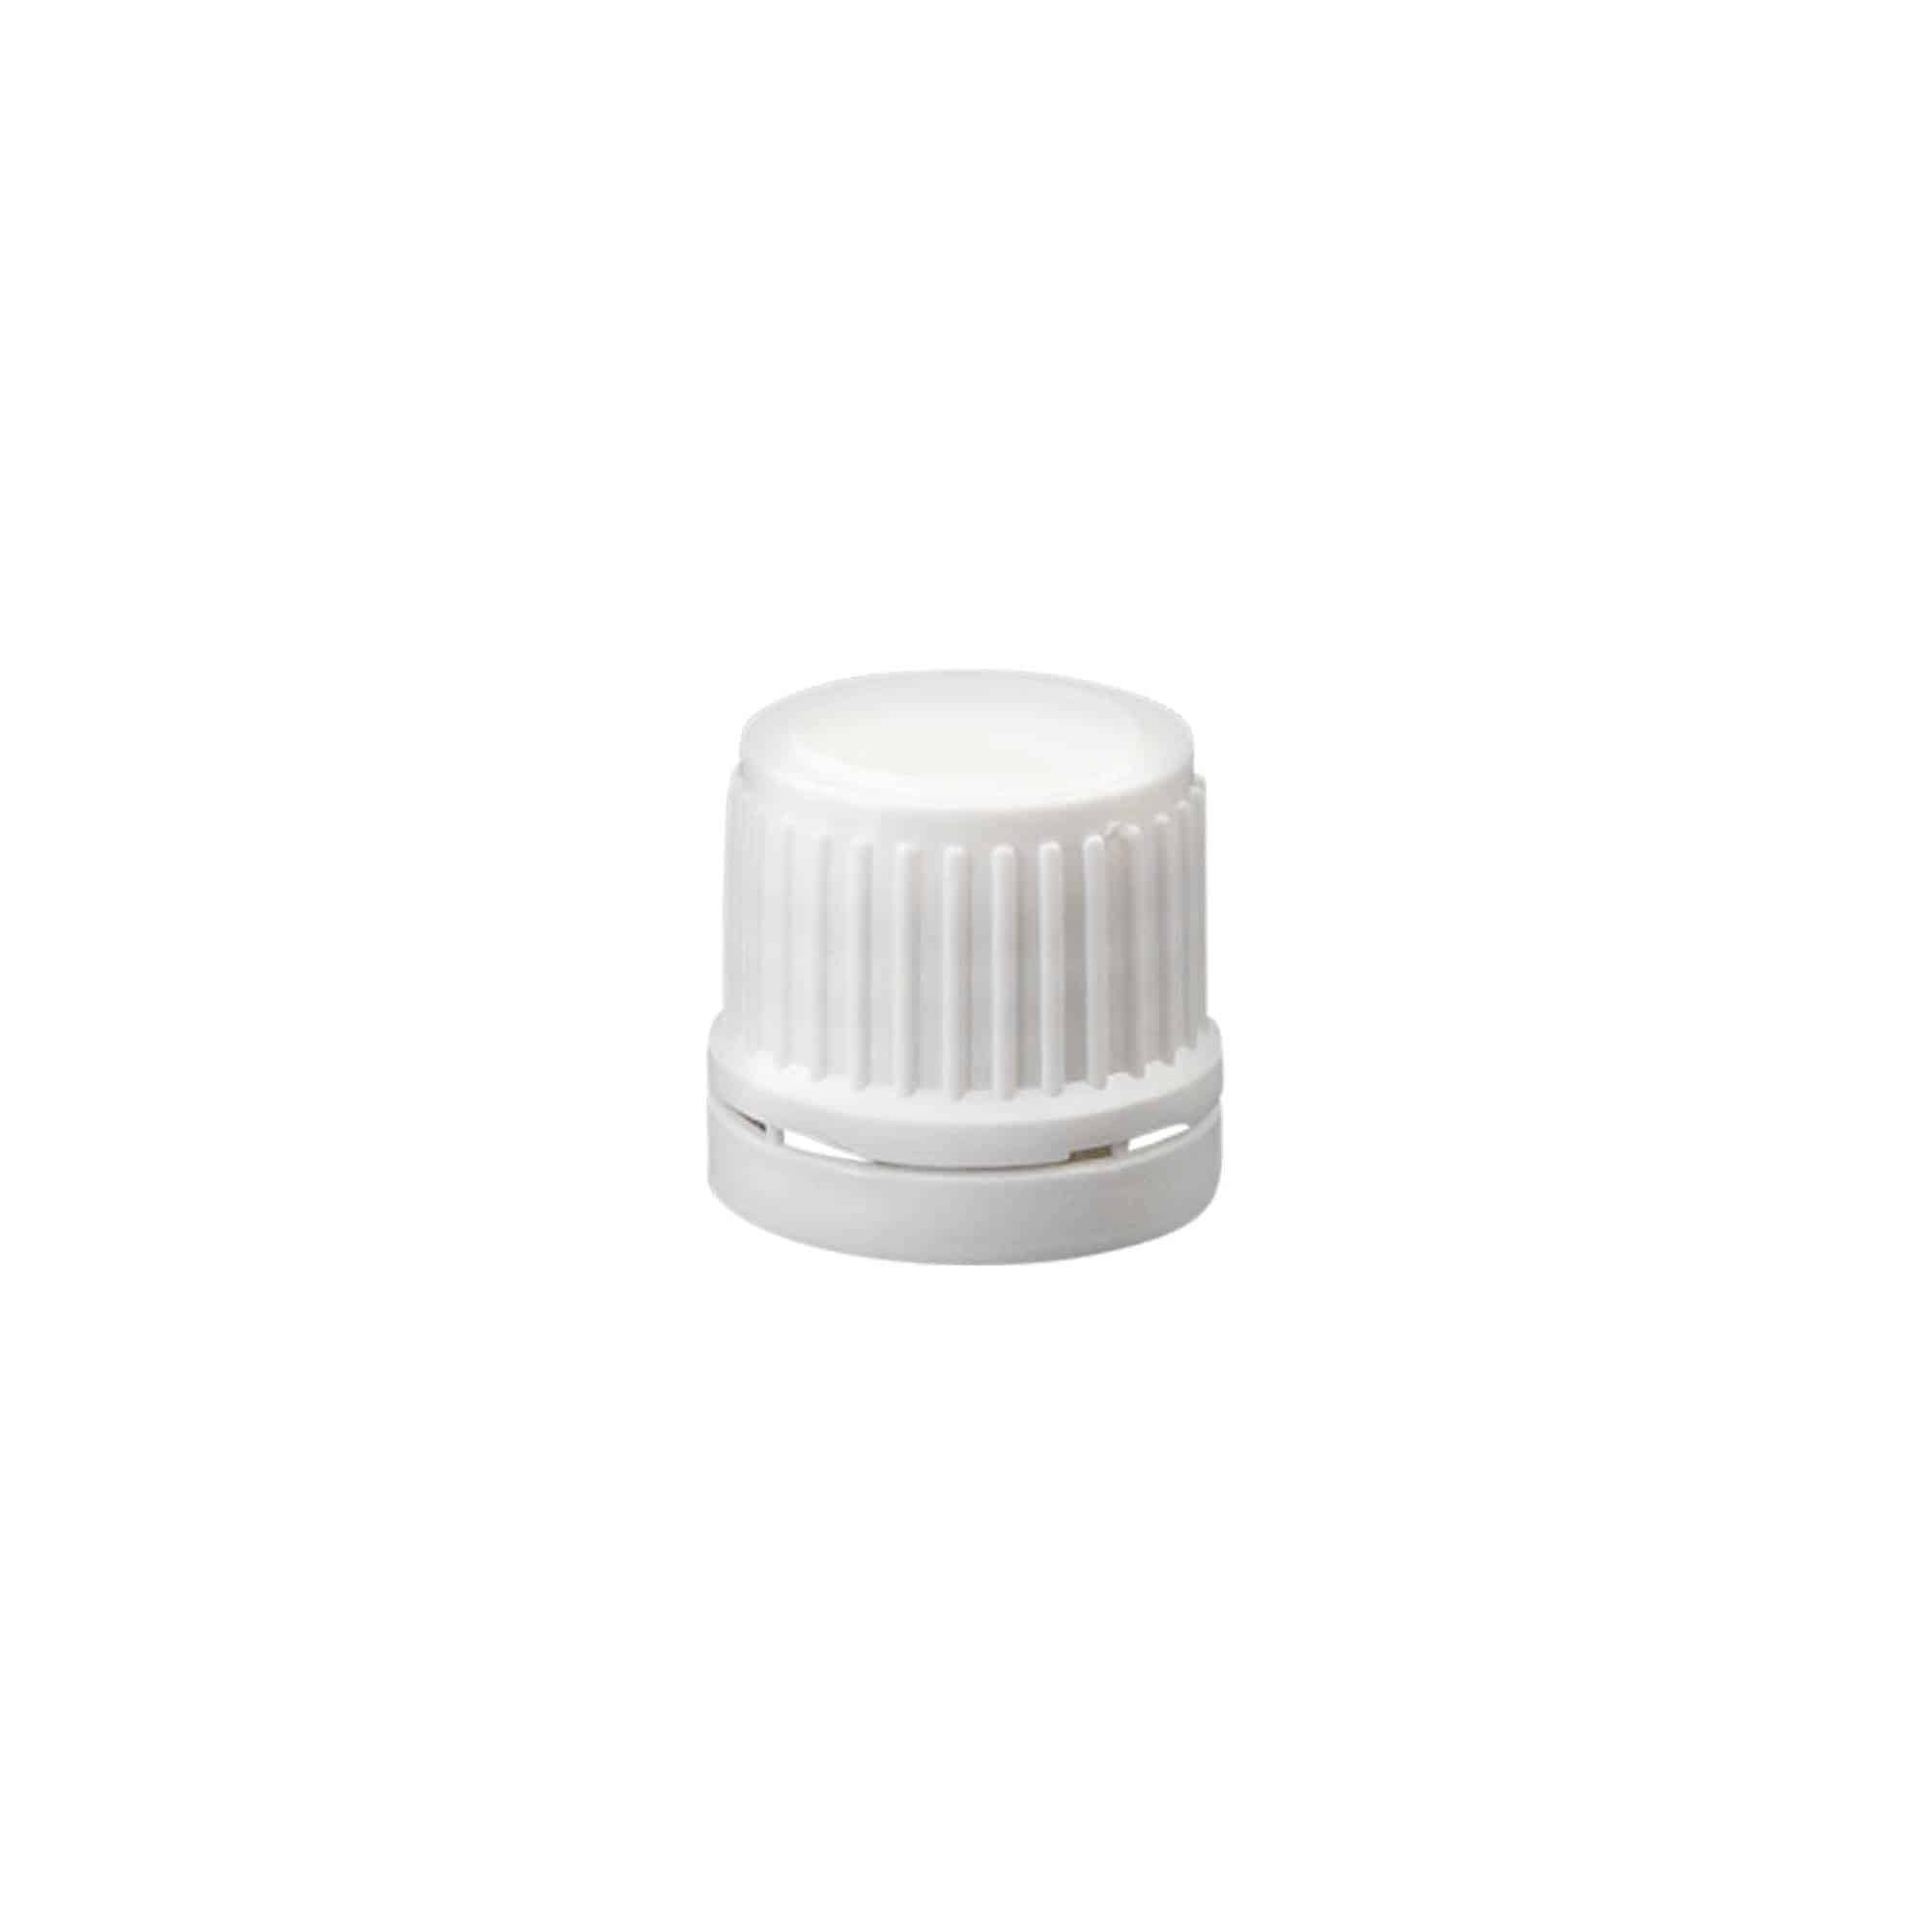 Screw cap with tamper evident seal, PE plastic, white, for opening: DIN 18